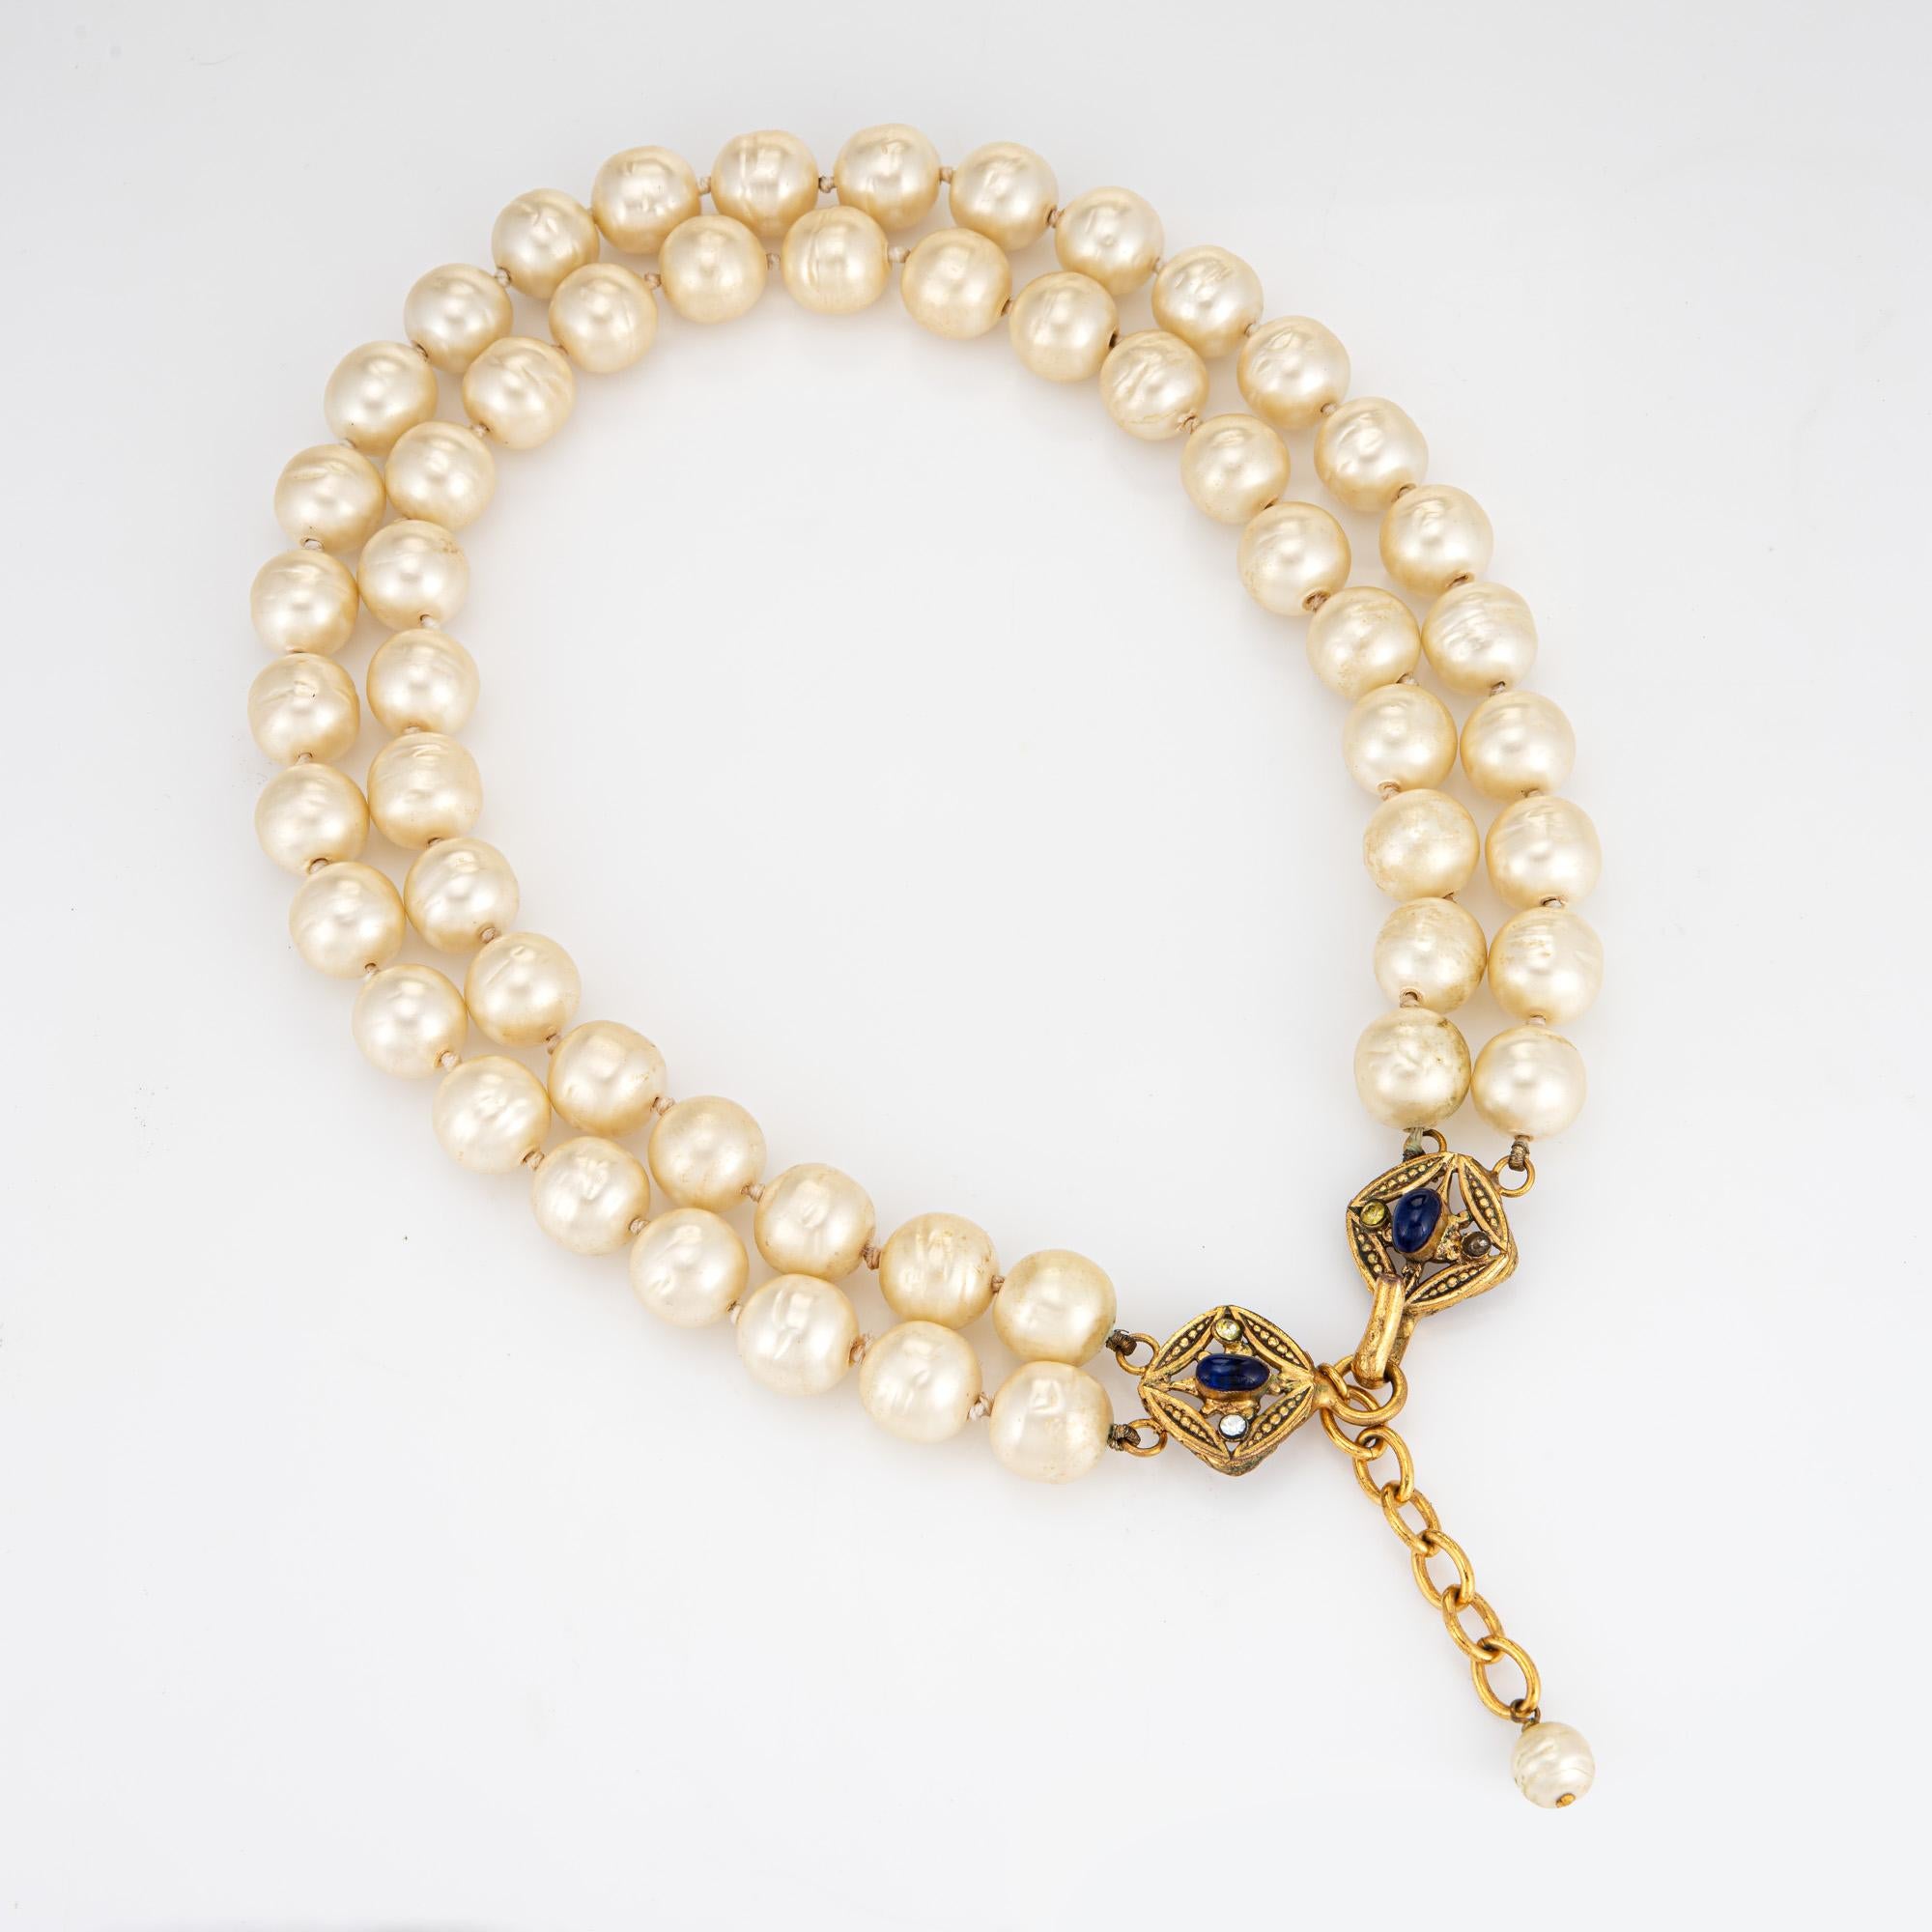 Modern 1995 Vintage Chanel Choker Necklace Double Strand 12mm Faux Pearls Gripoix Clasp For Sale